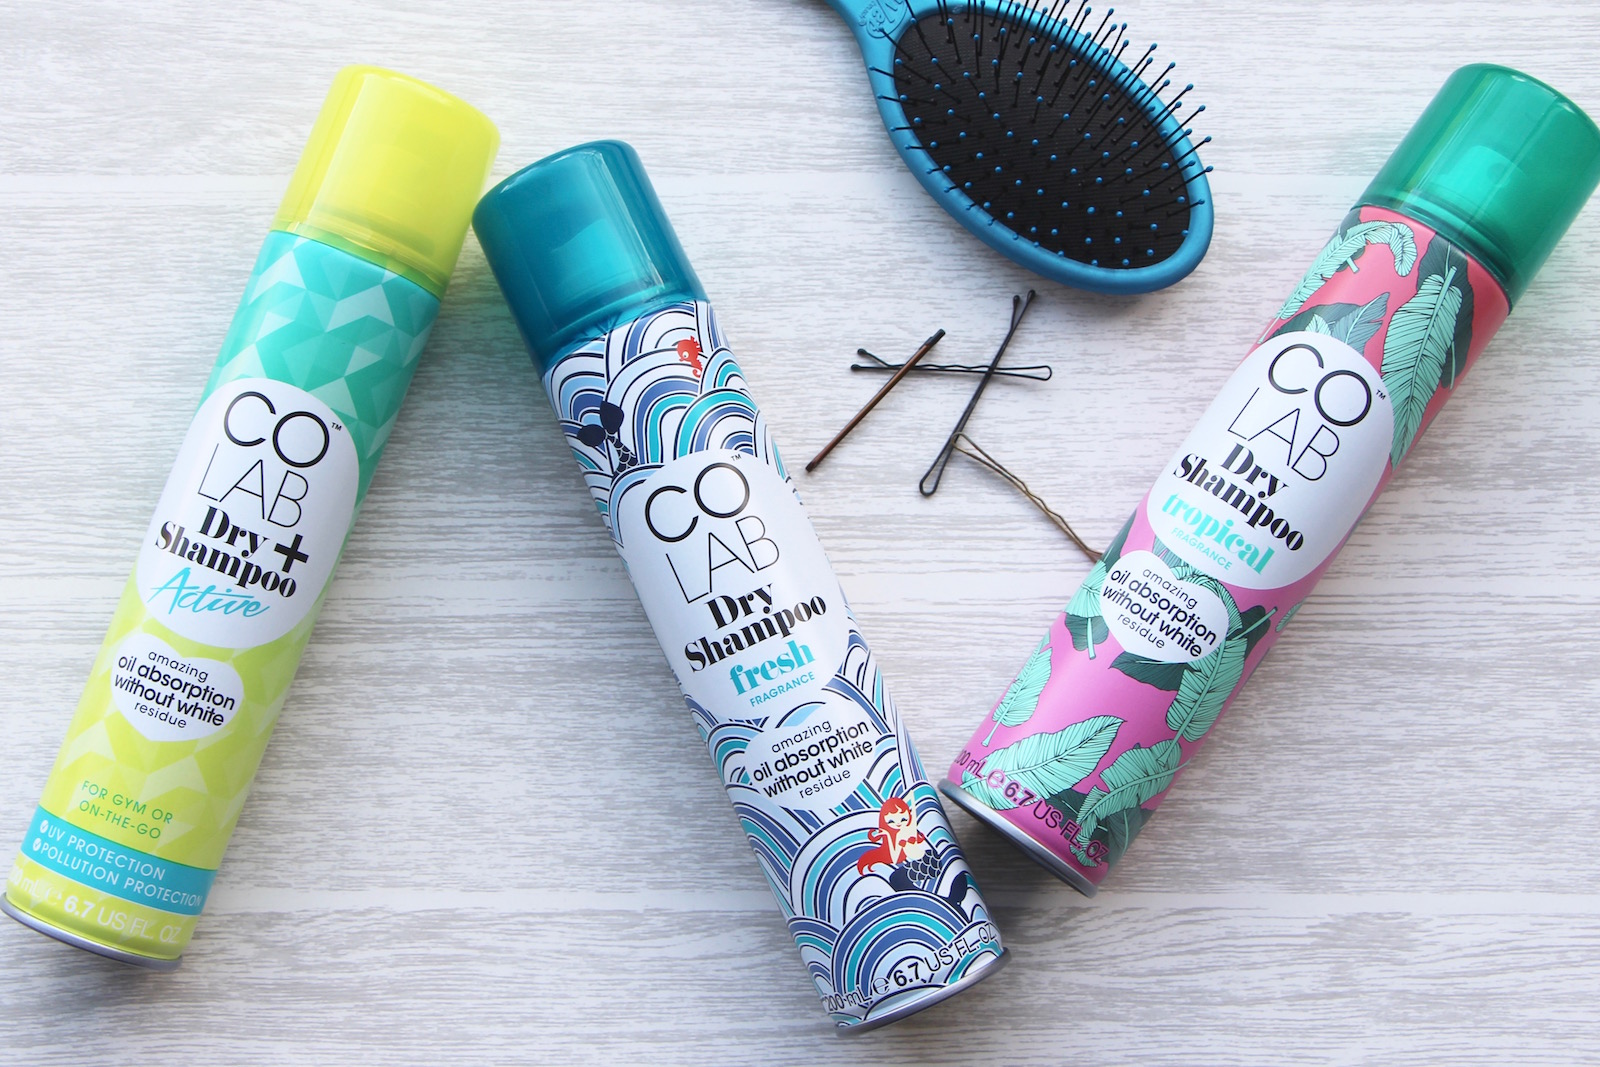 colab dry shampoo new packaging